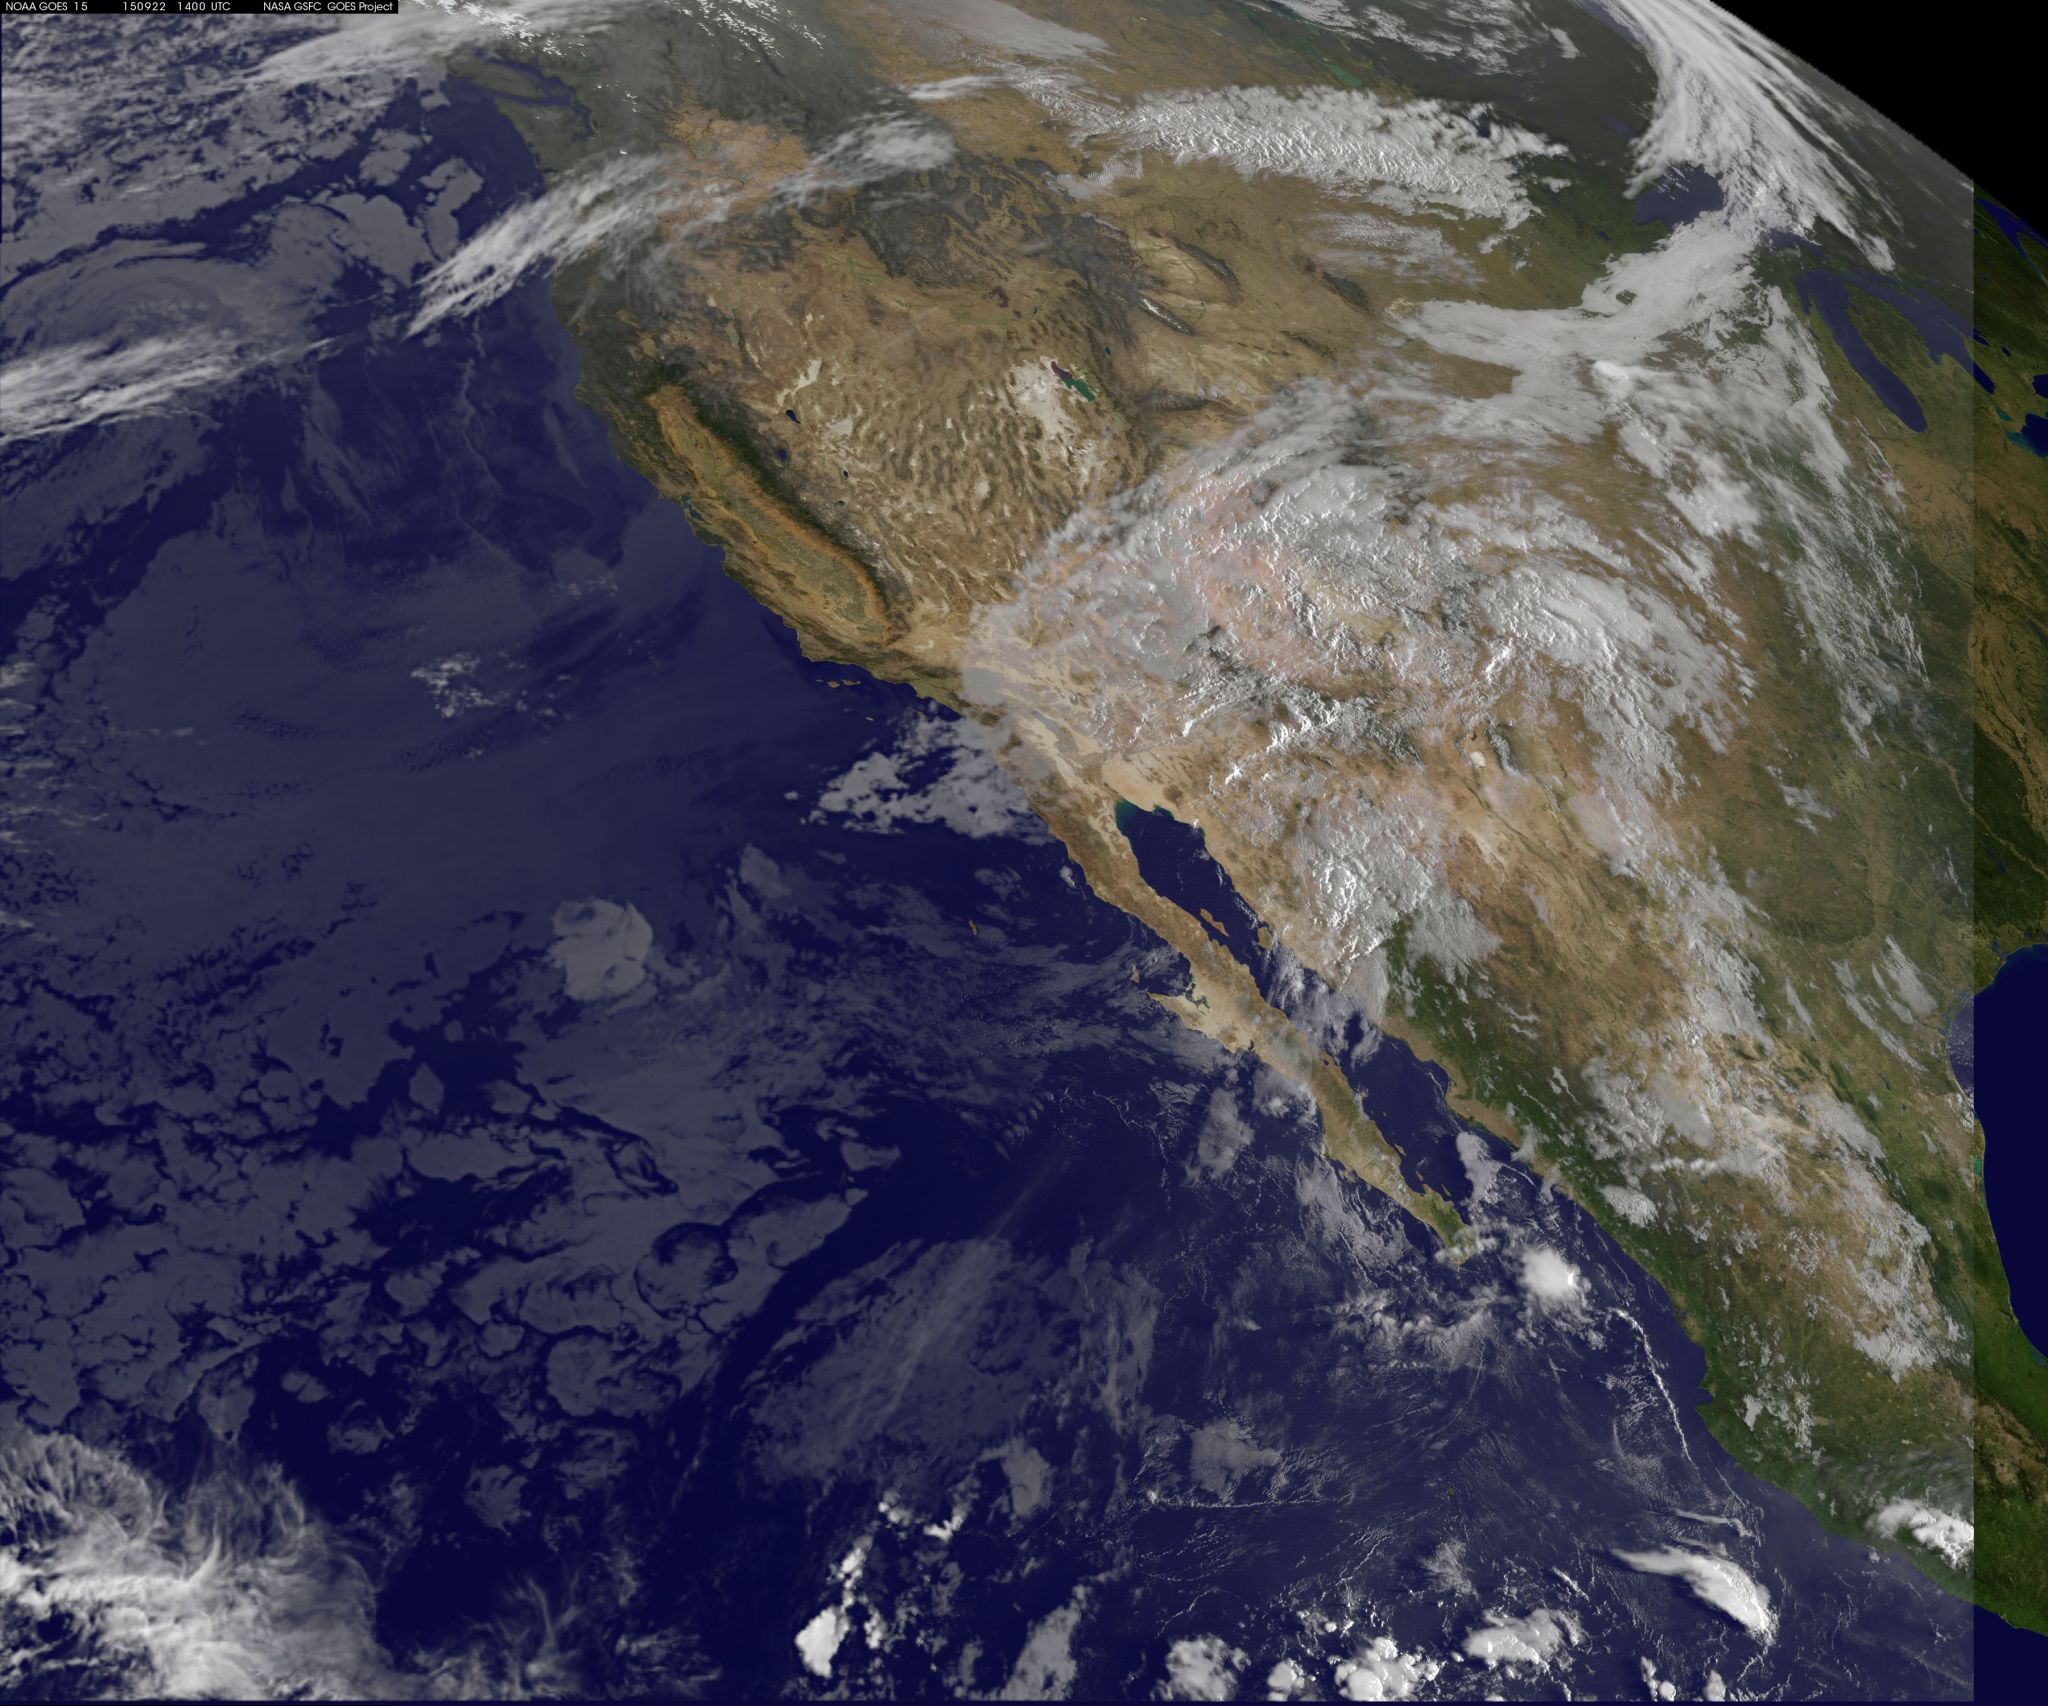 Satellite imagery of remnants of Tropical Depression 16E over Arizona and New Mexico